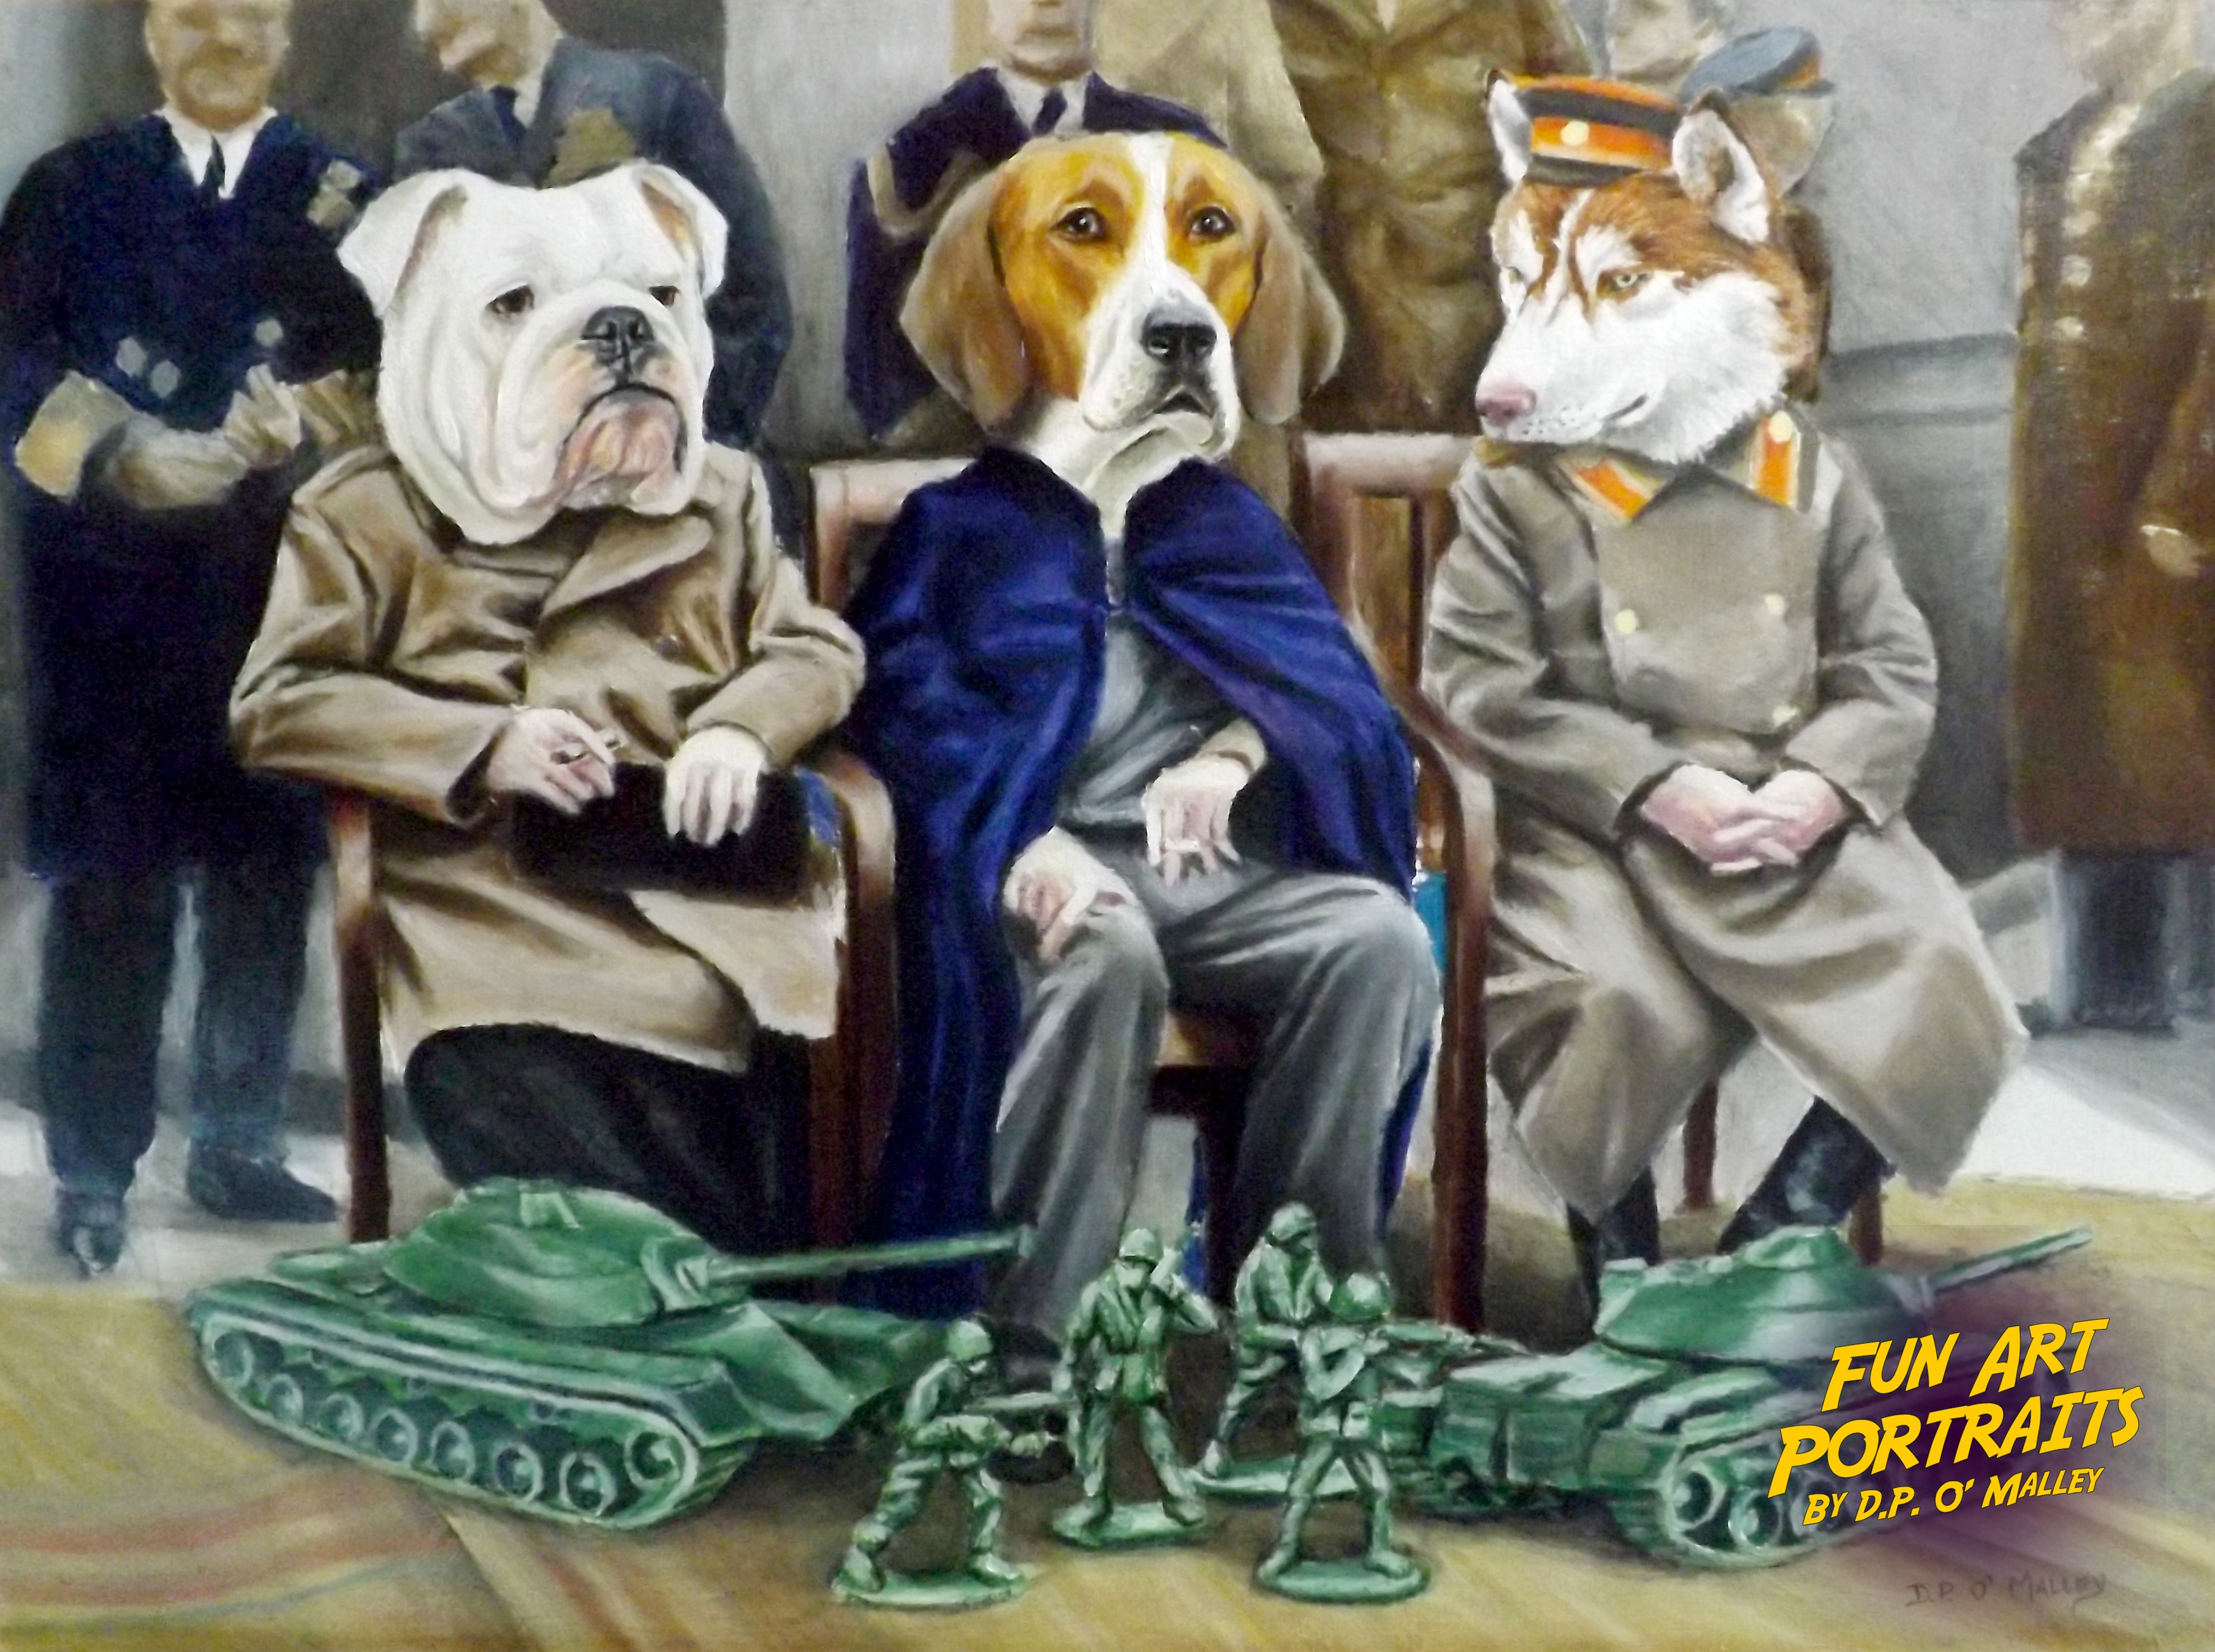 Dogs Of War